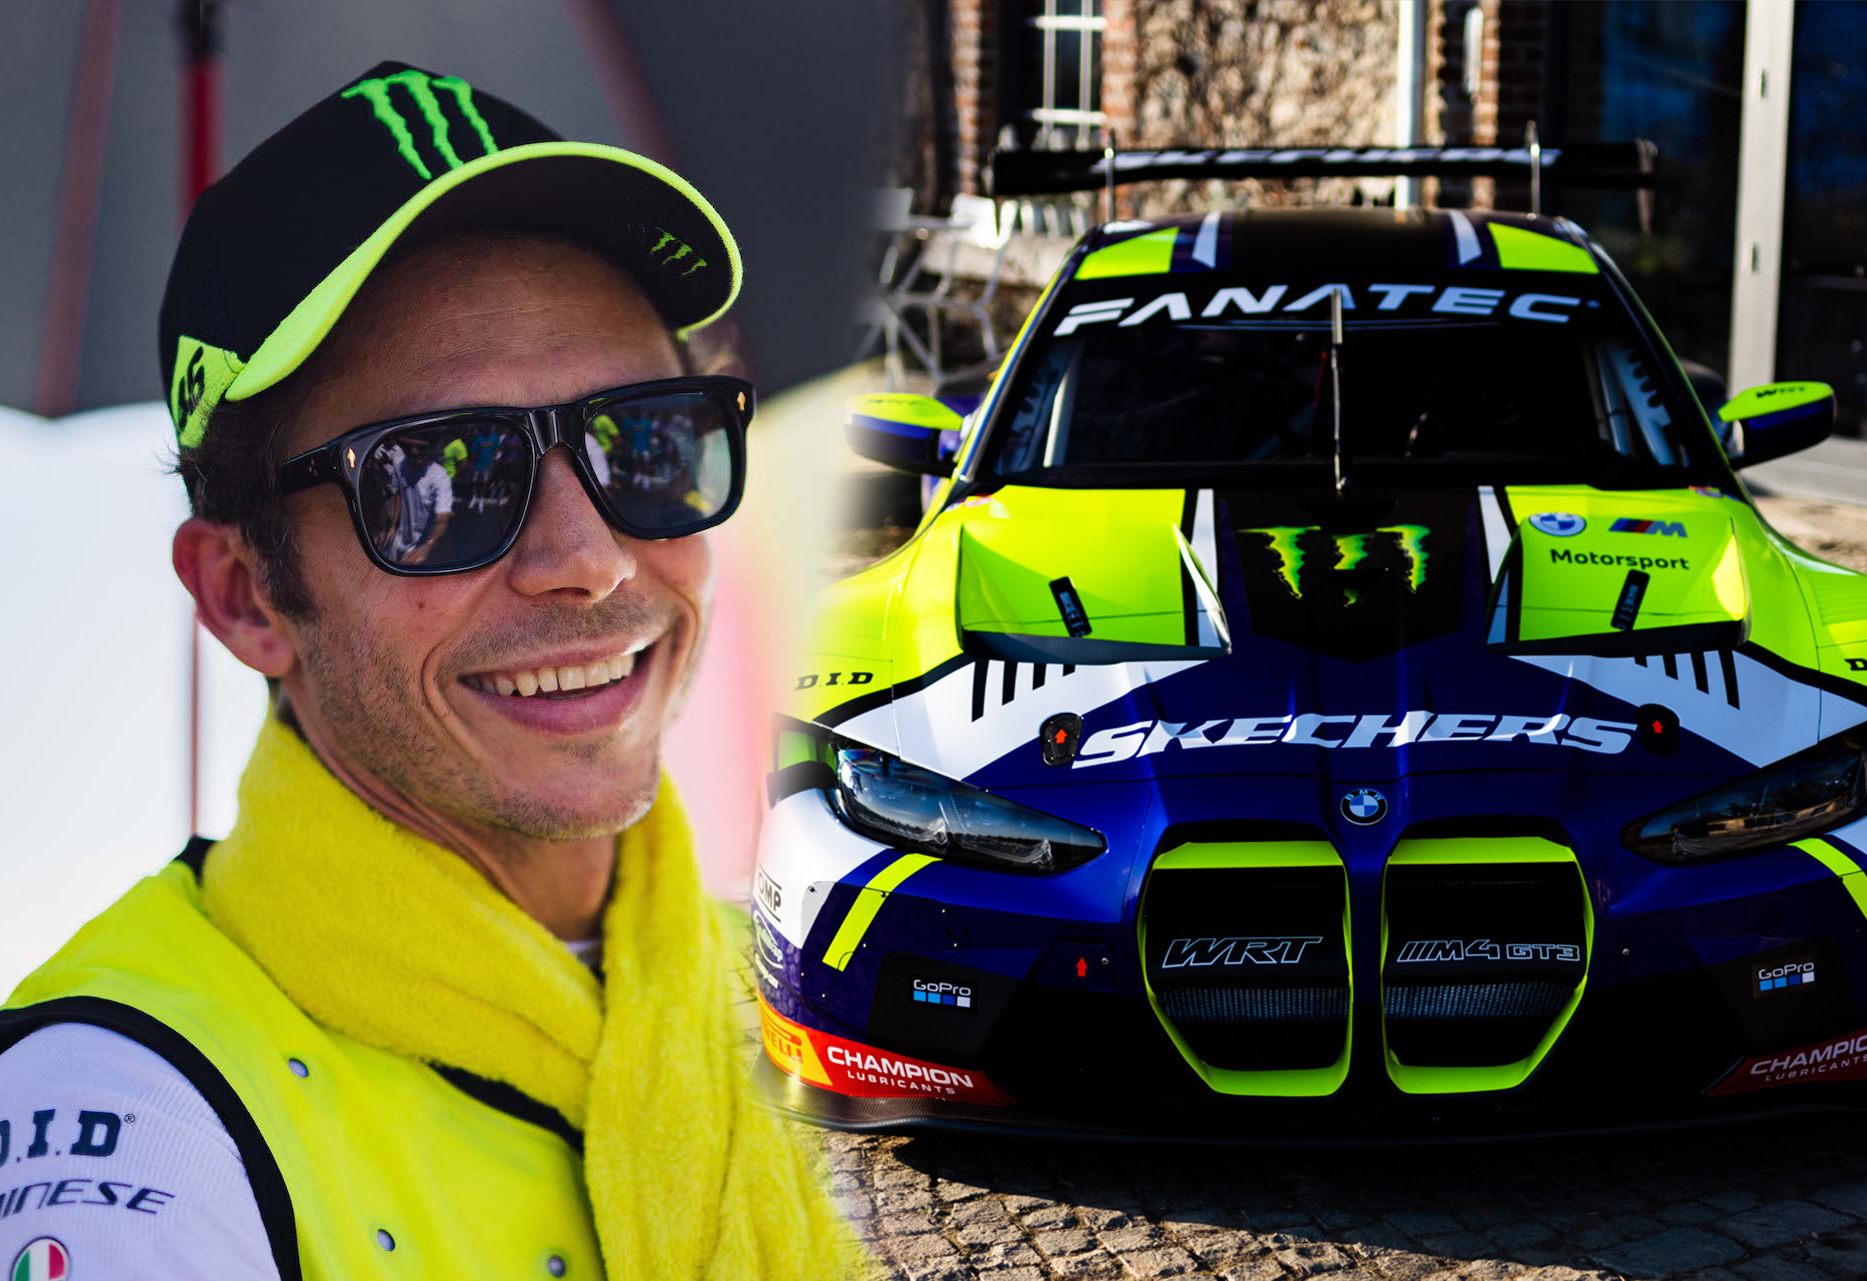 BMW M signs Valentino Rossi as works driver, to race Bathurst 12 Hour